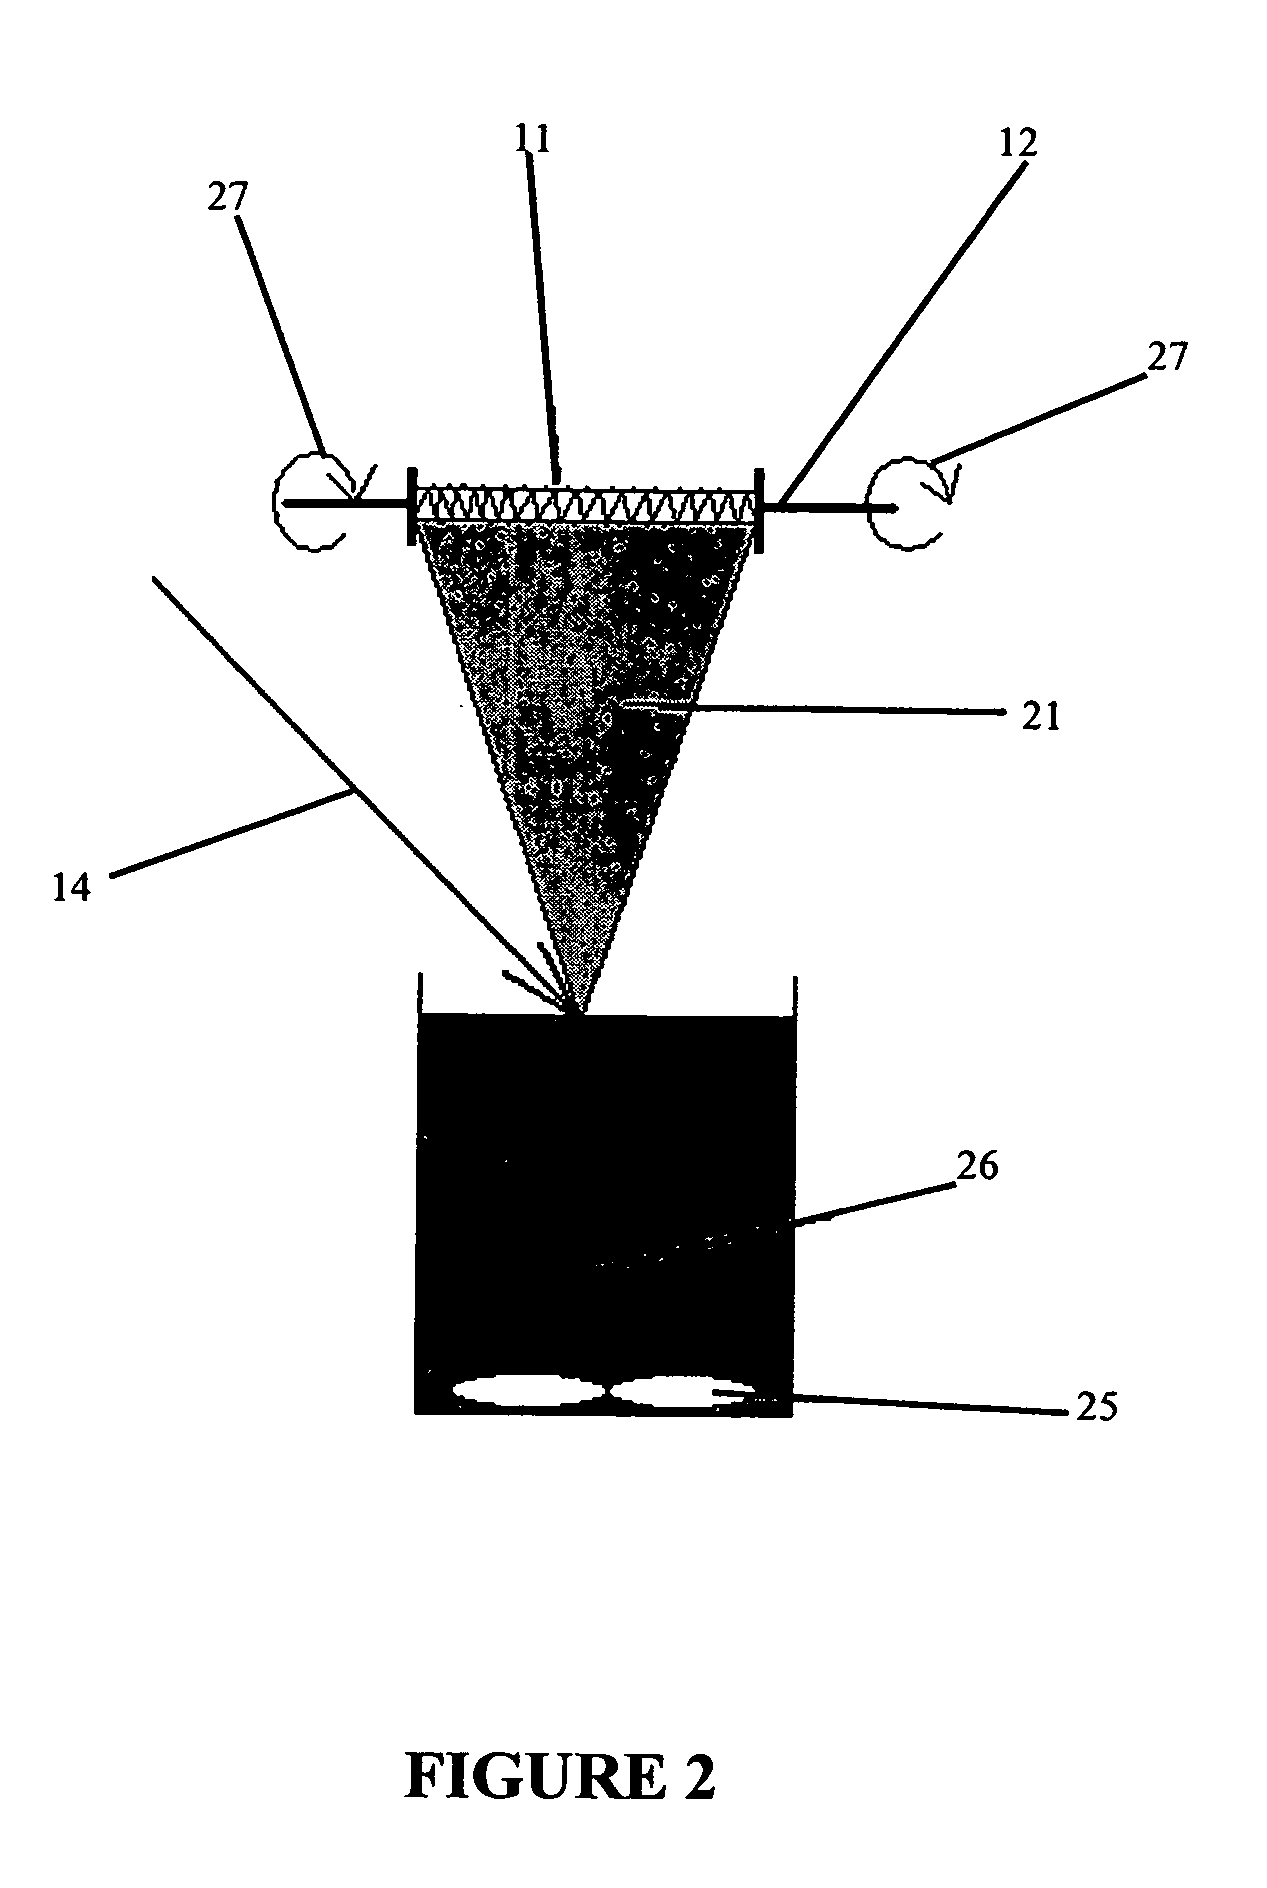 Matrix assisted pulsed-laser evaporation technique for coating a medical device and associated system and medical device